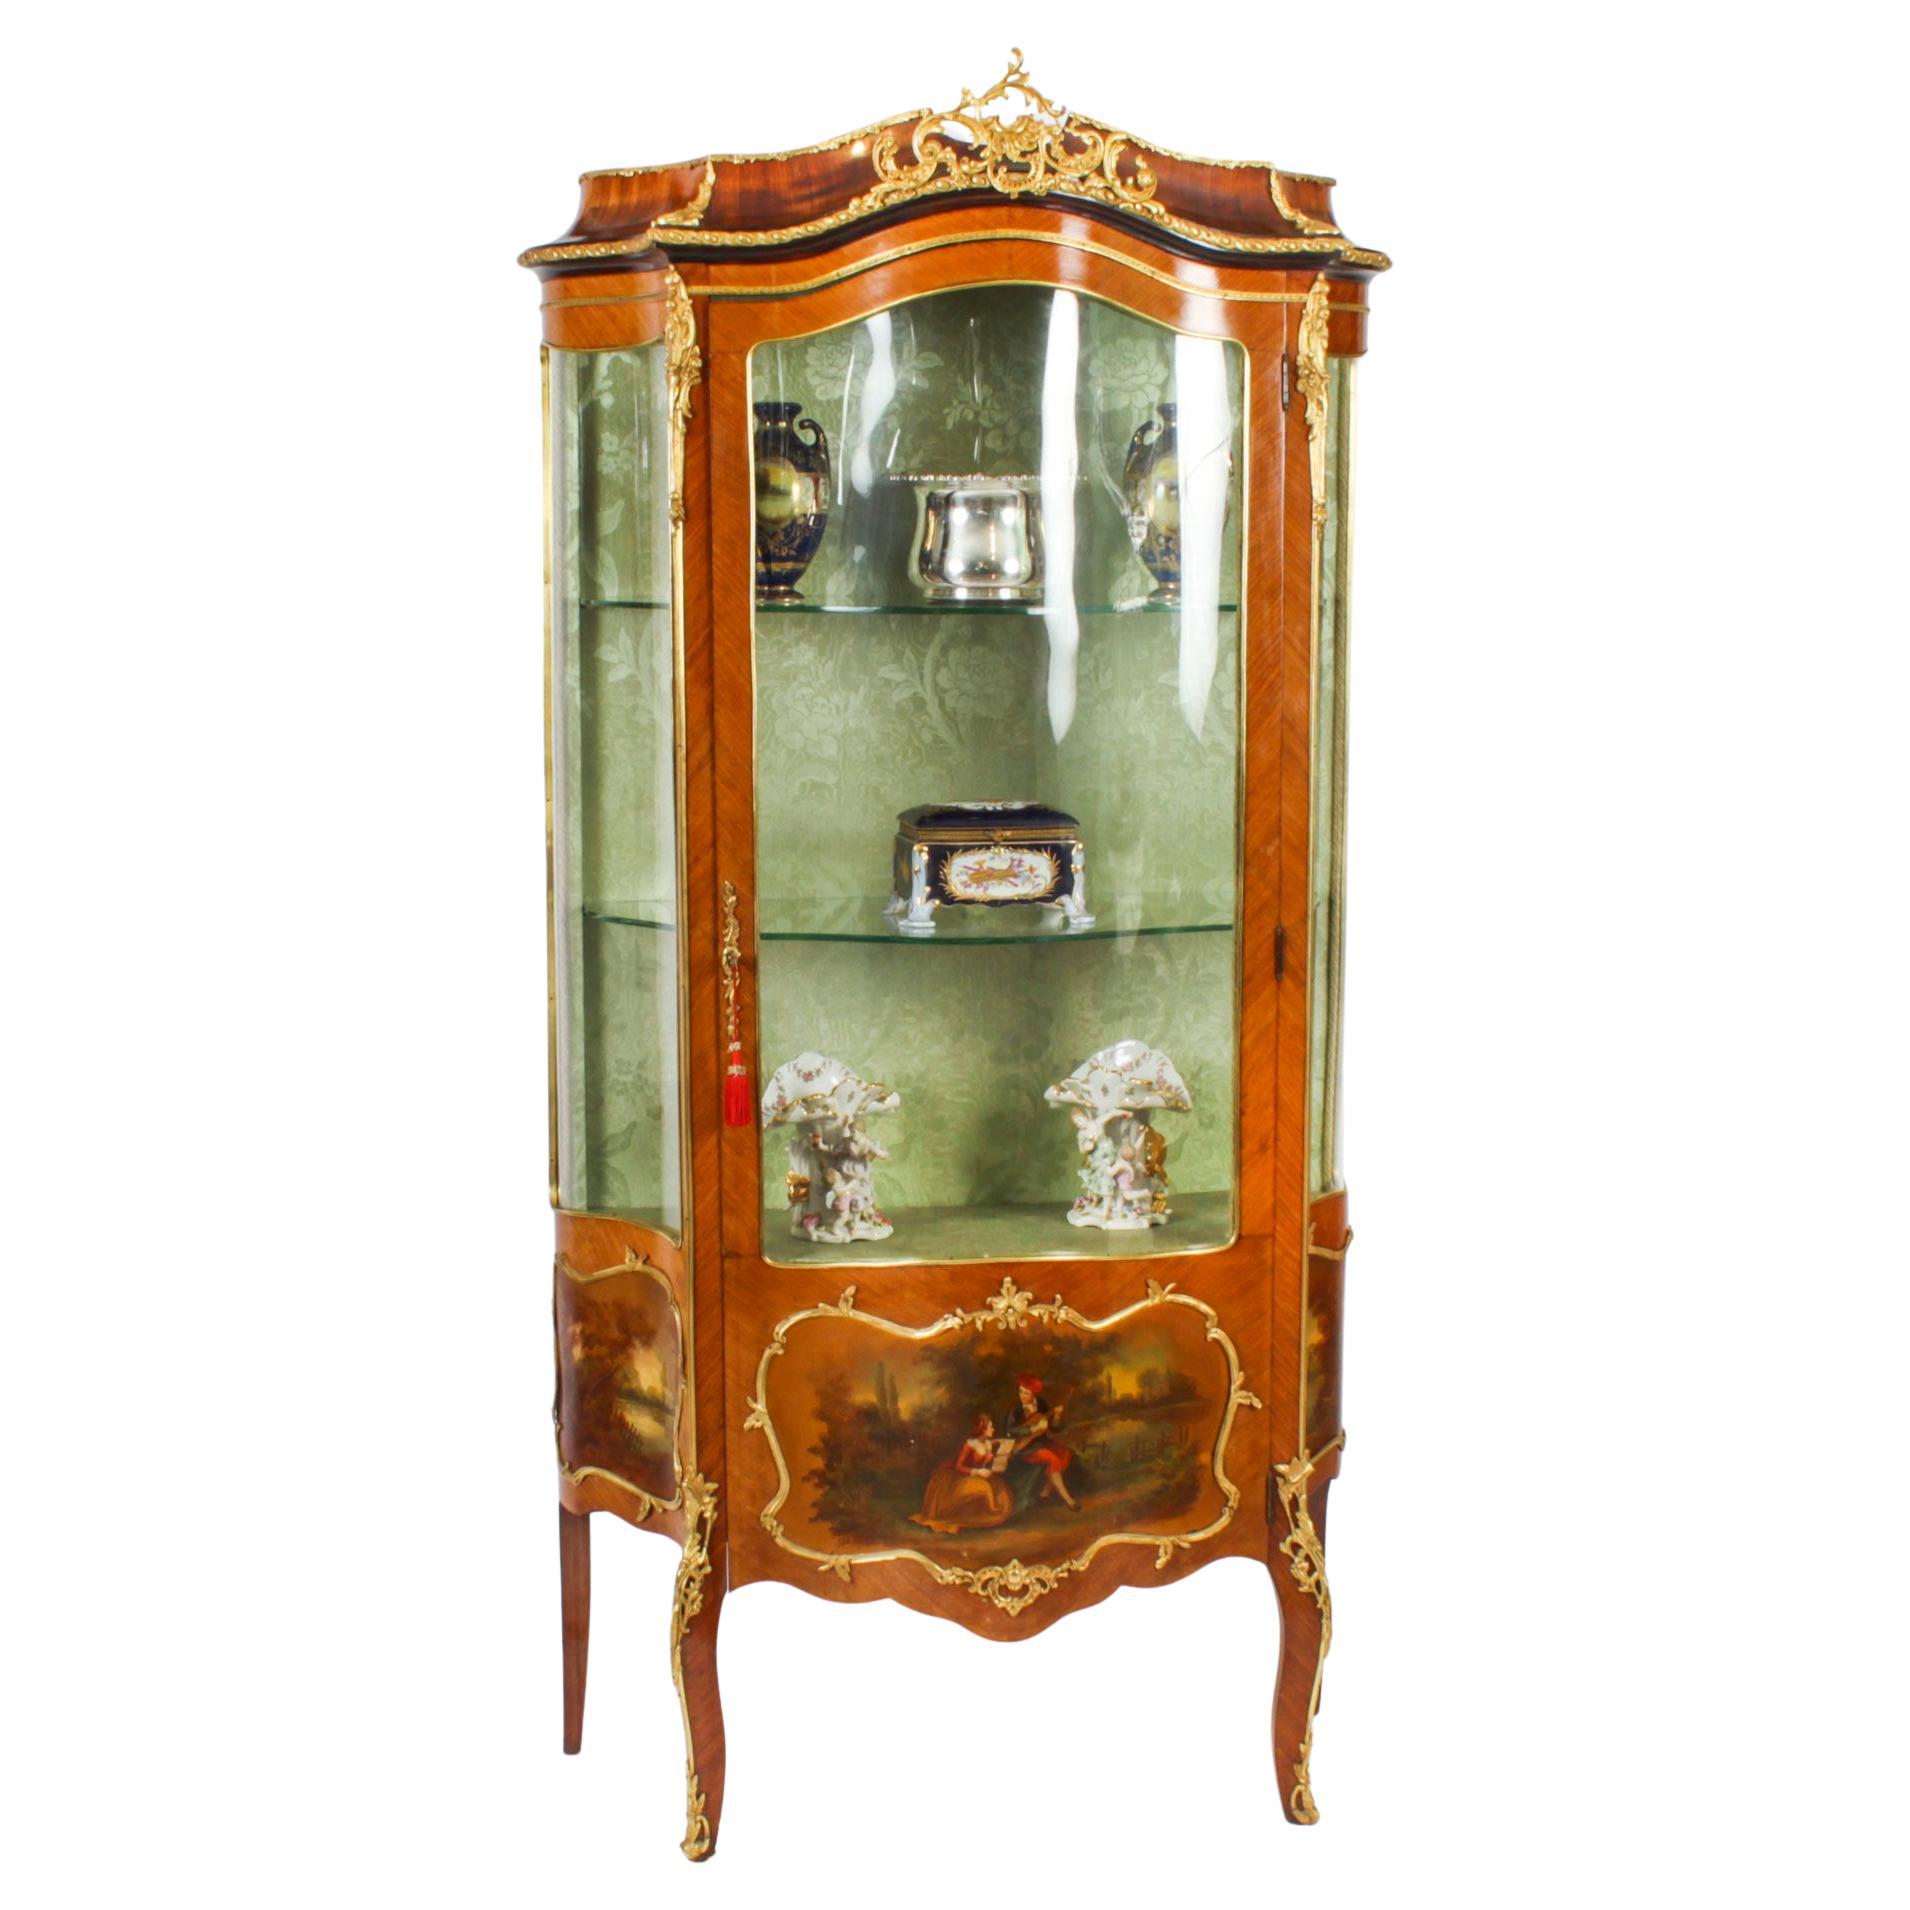 This is a stunning antique French Louis XV Revival wood and ormolu mounted Vernis Martin display cabinet, circa 1880 in date.
 
The cabinet features a shaped top with impressive and ornate ormolu mounts. The body is serpentine shaped with a glazed